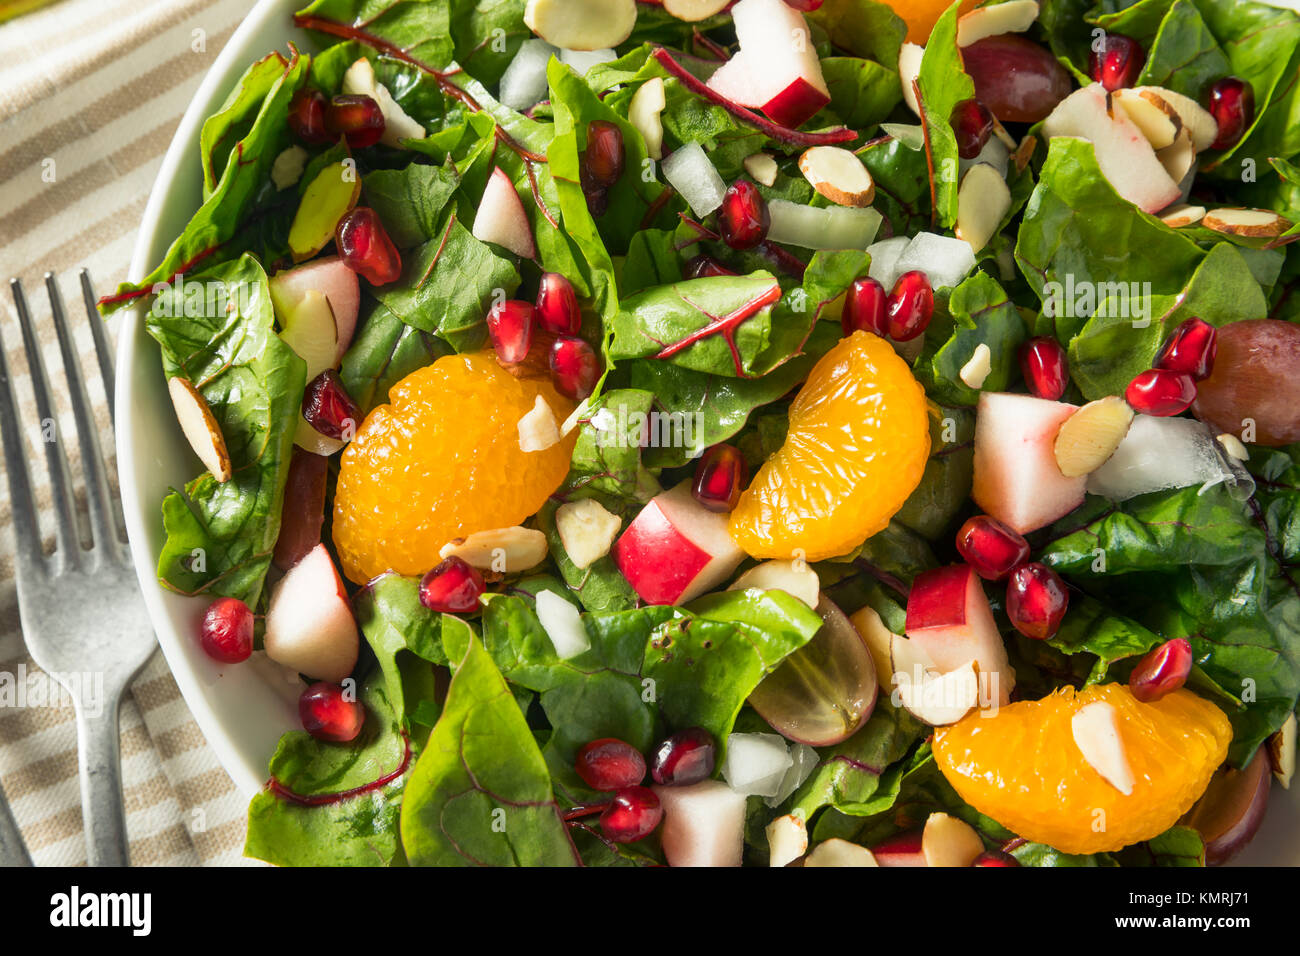 Raw Organic Winter Chard Salad with Oranges Almonds and Apples Stock Photo